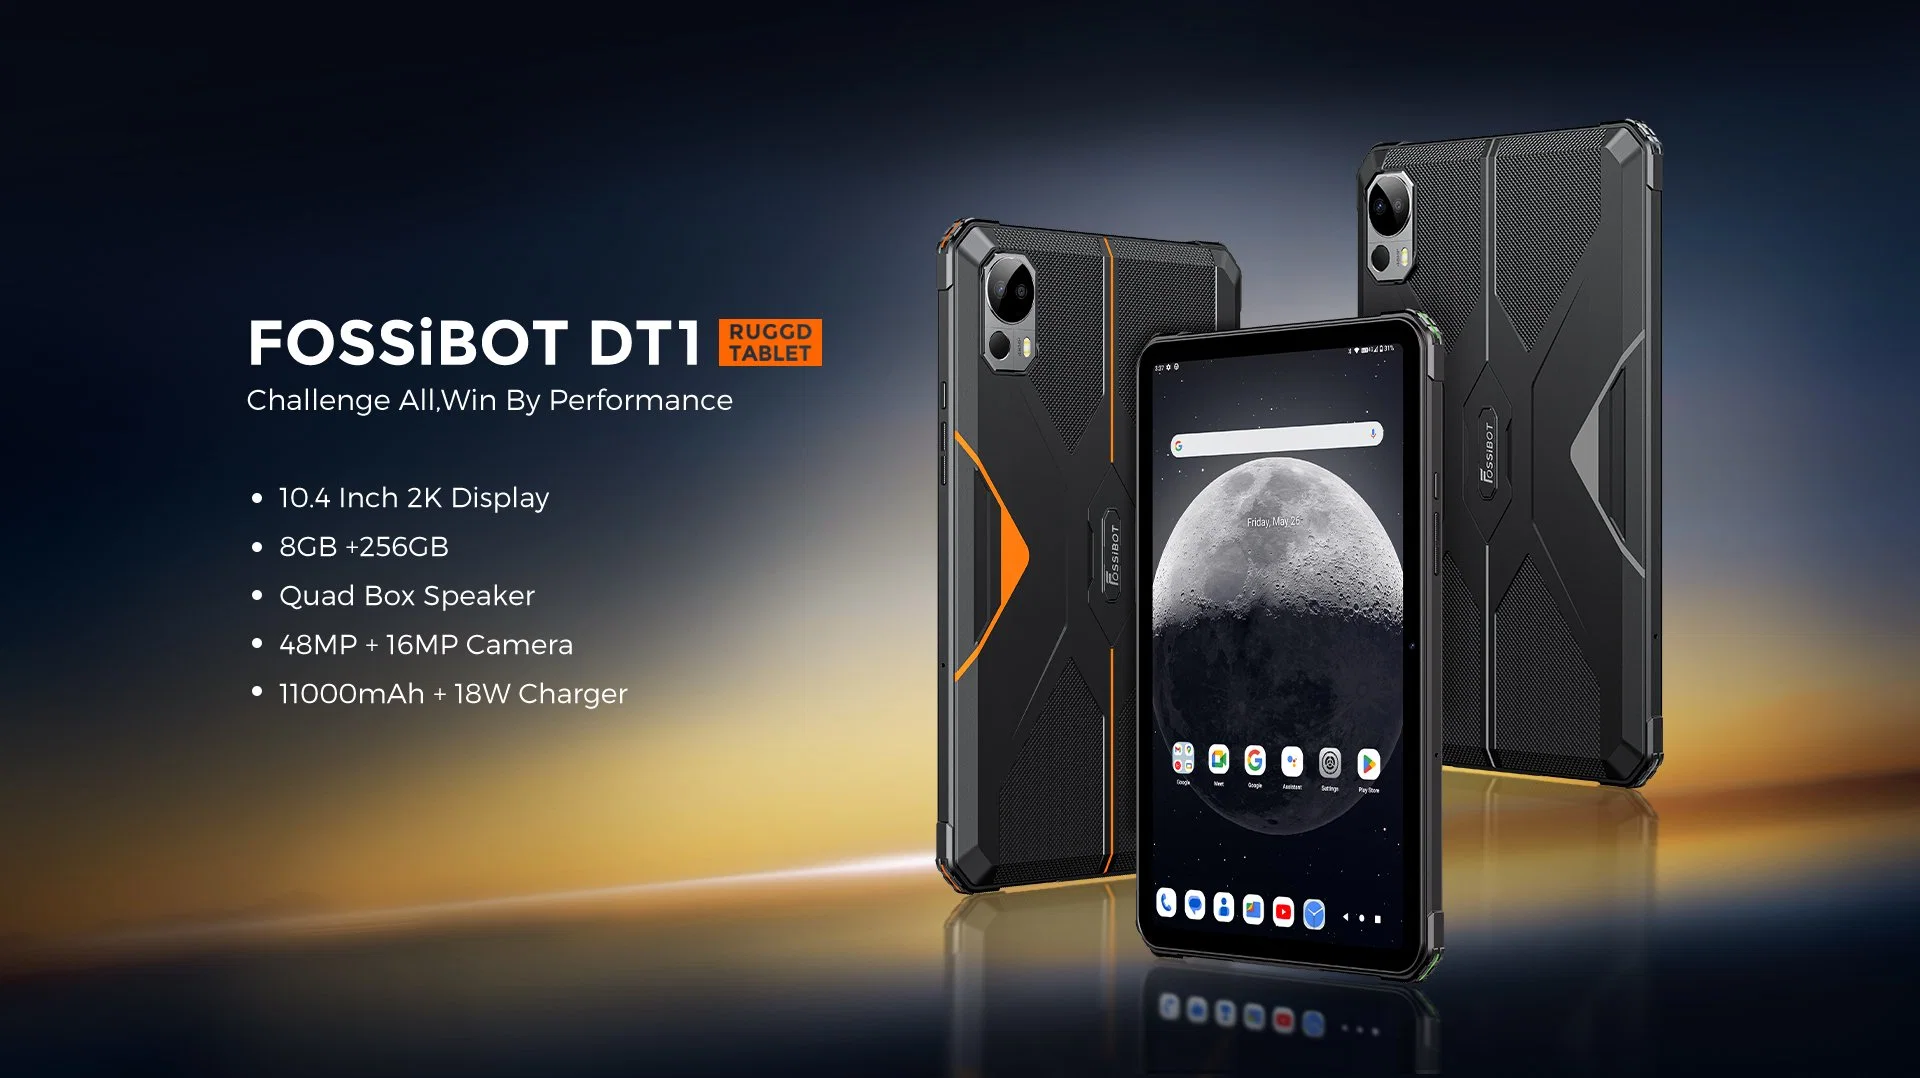 Fossibot dt1 tablet robusto 10,4"FHD 11000+ mAh+2568 GB GB 13 Android Tablets 48MP 33W ALMOFADA DE CARGA